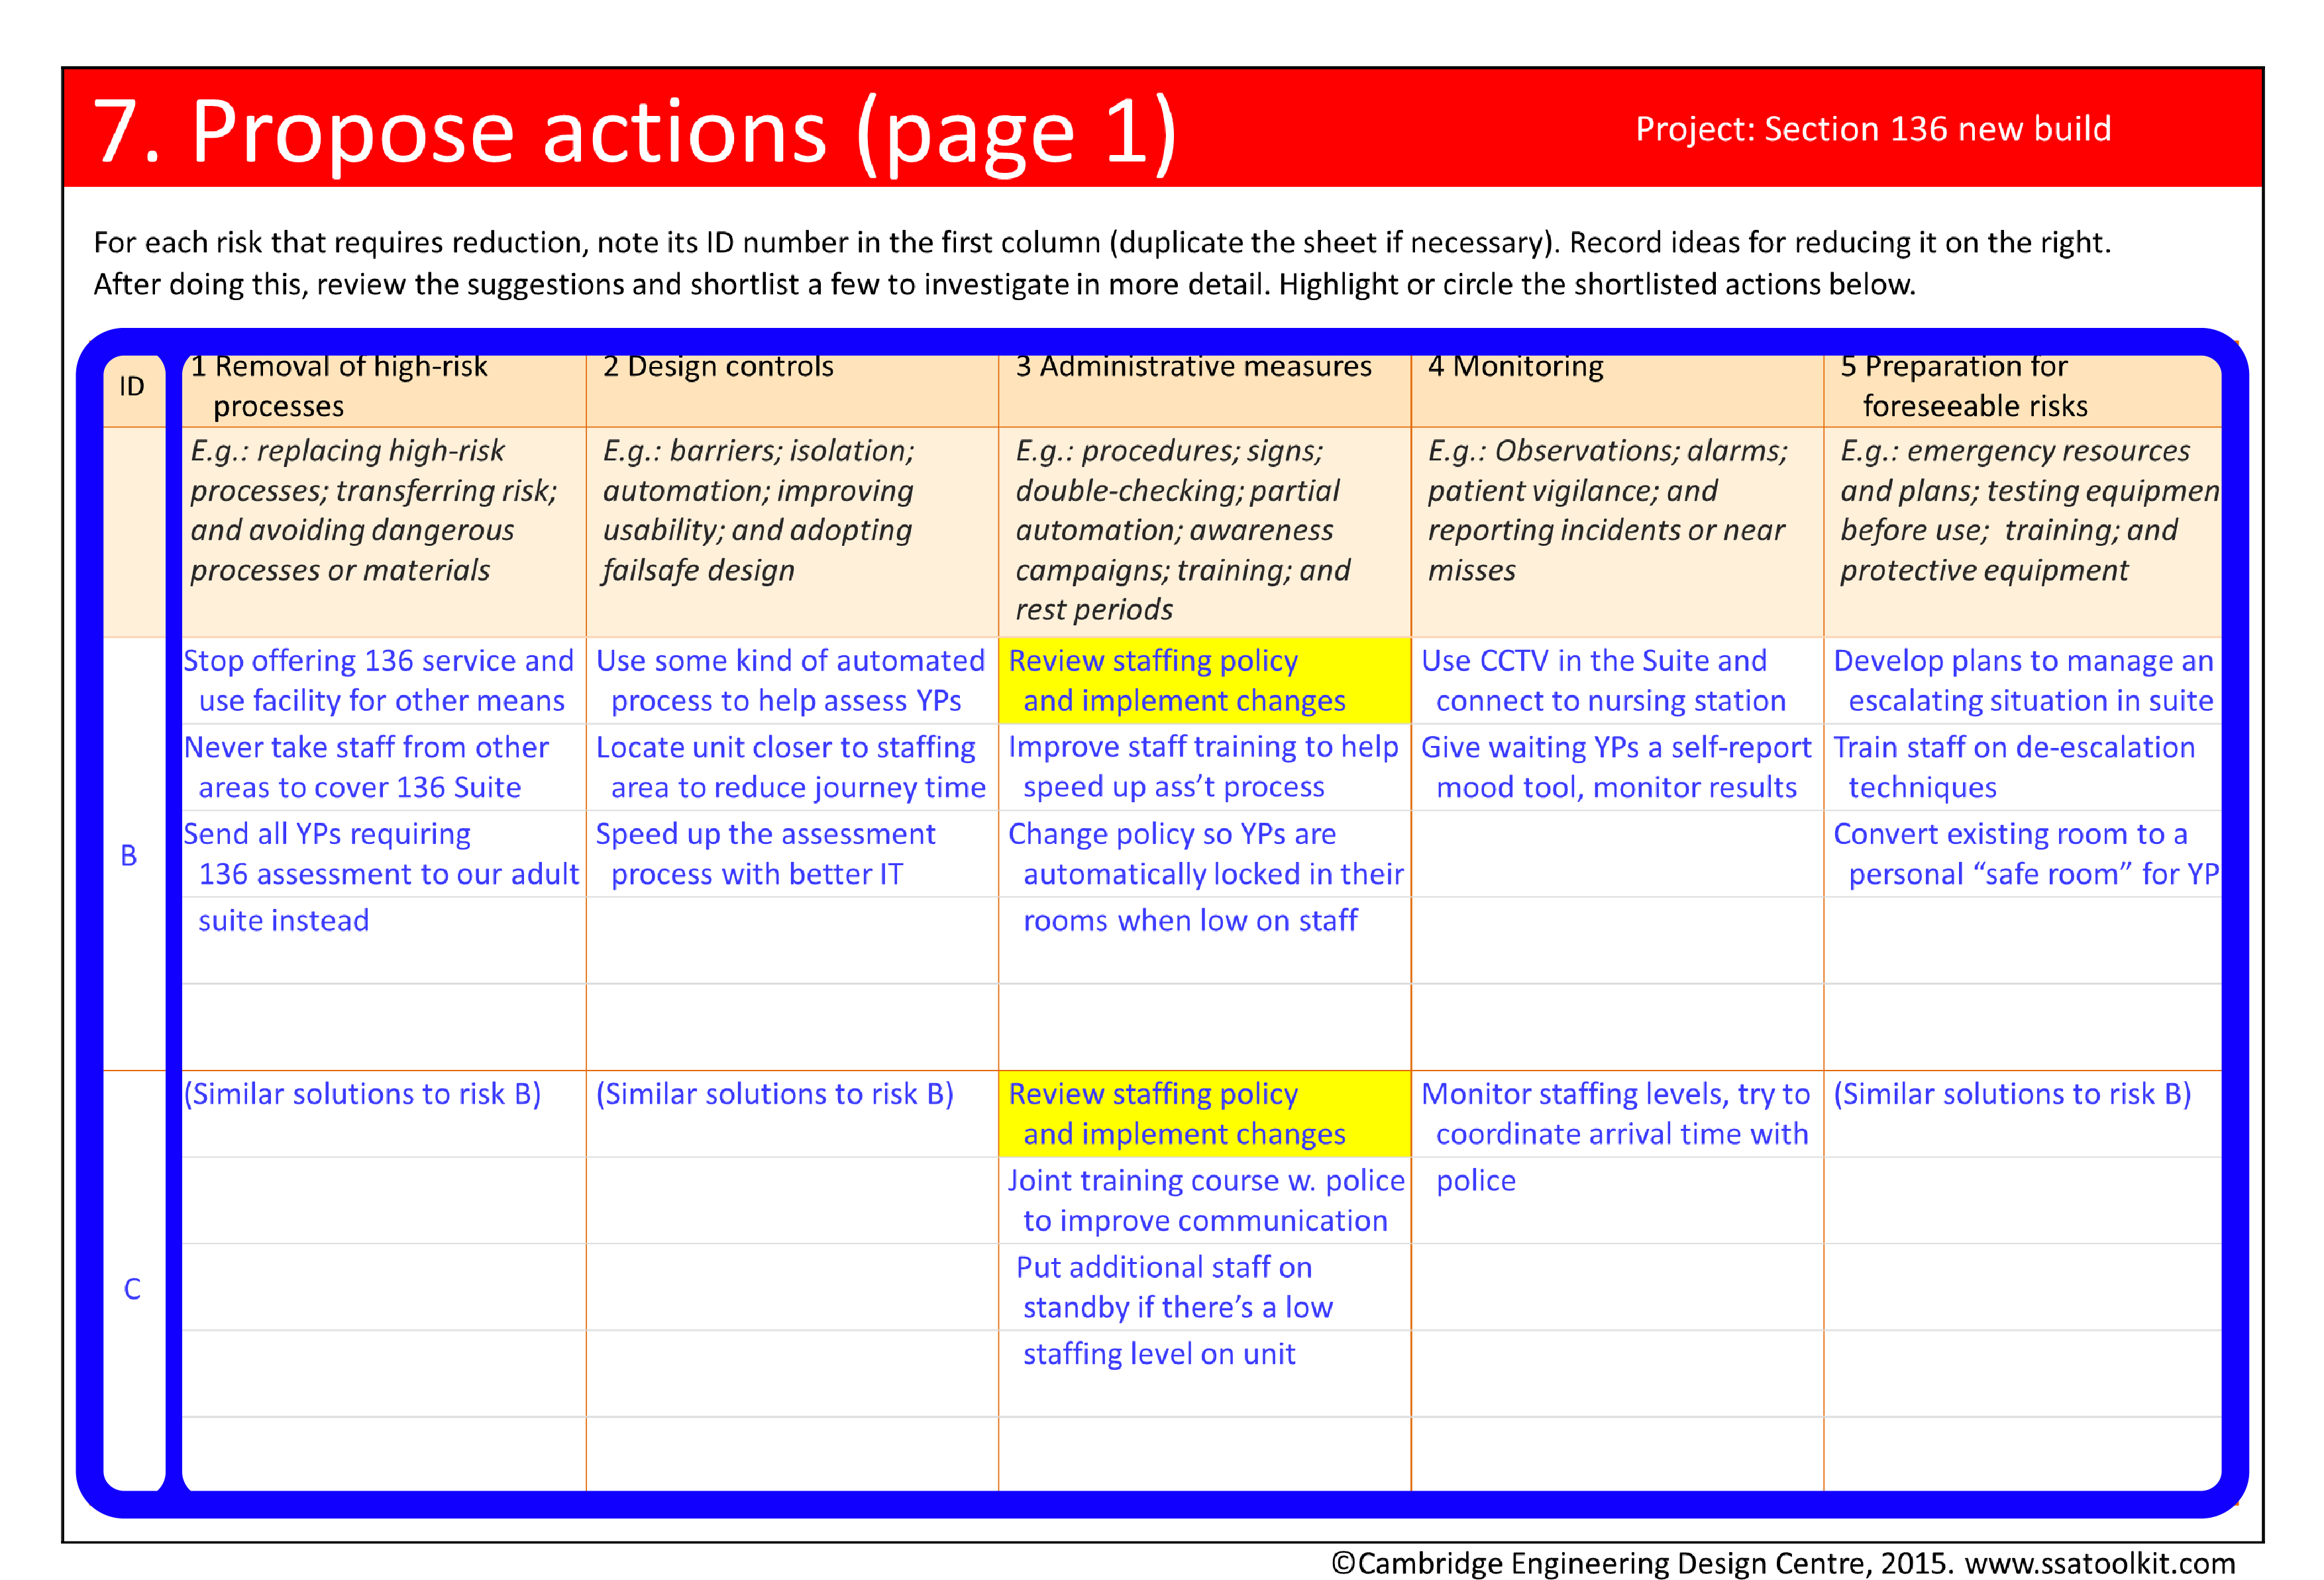 Screenshot of part of the Propose actions page from the Section 136 case study. Possible measures for reducing the risks are listed in five columns corresponding to different types of measures. One action is highlighted for risk B: Review staffing policy and implement changes. One action is highlighted for risk C: Review staffing policy and implement changes. Both are examples of Administrative measures. The full assessment form in pdf is available from the Resources page.